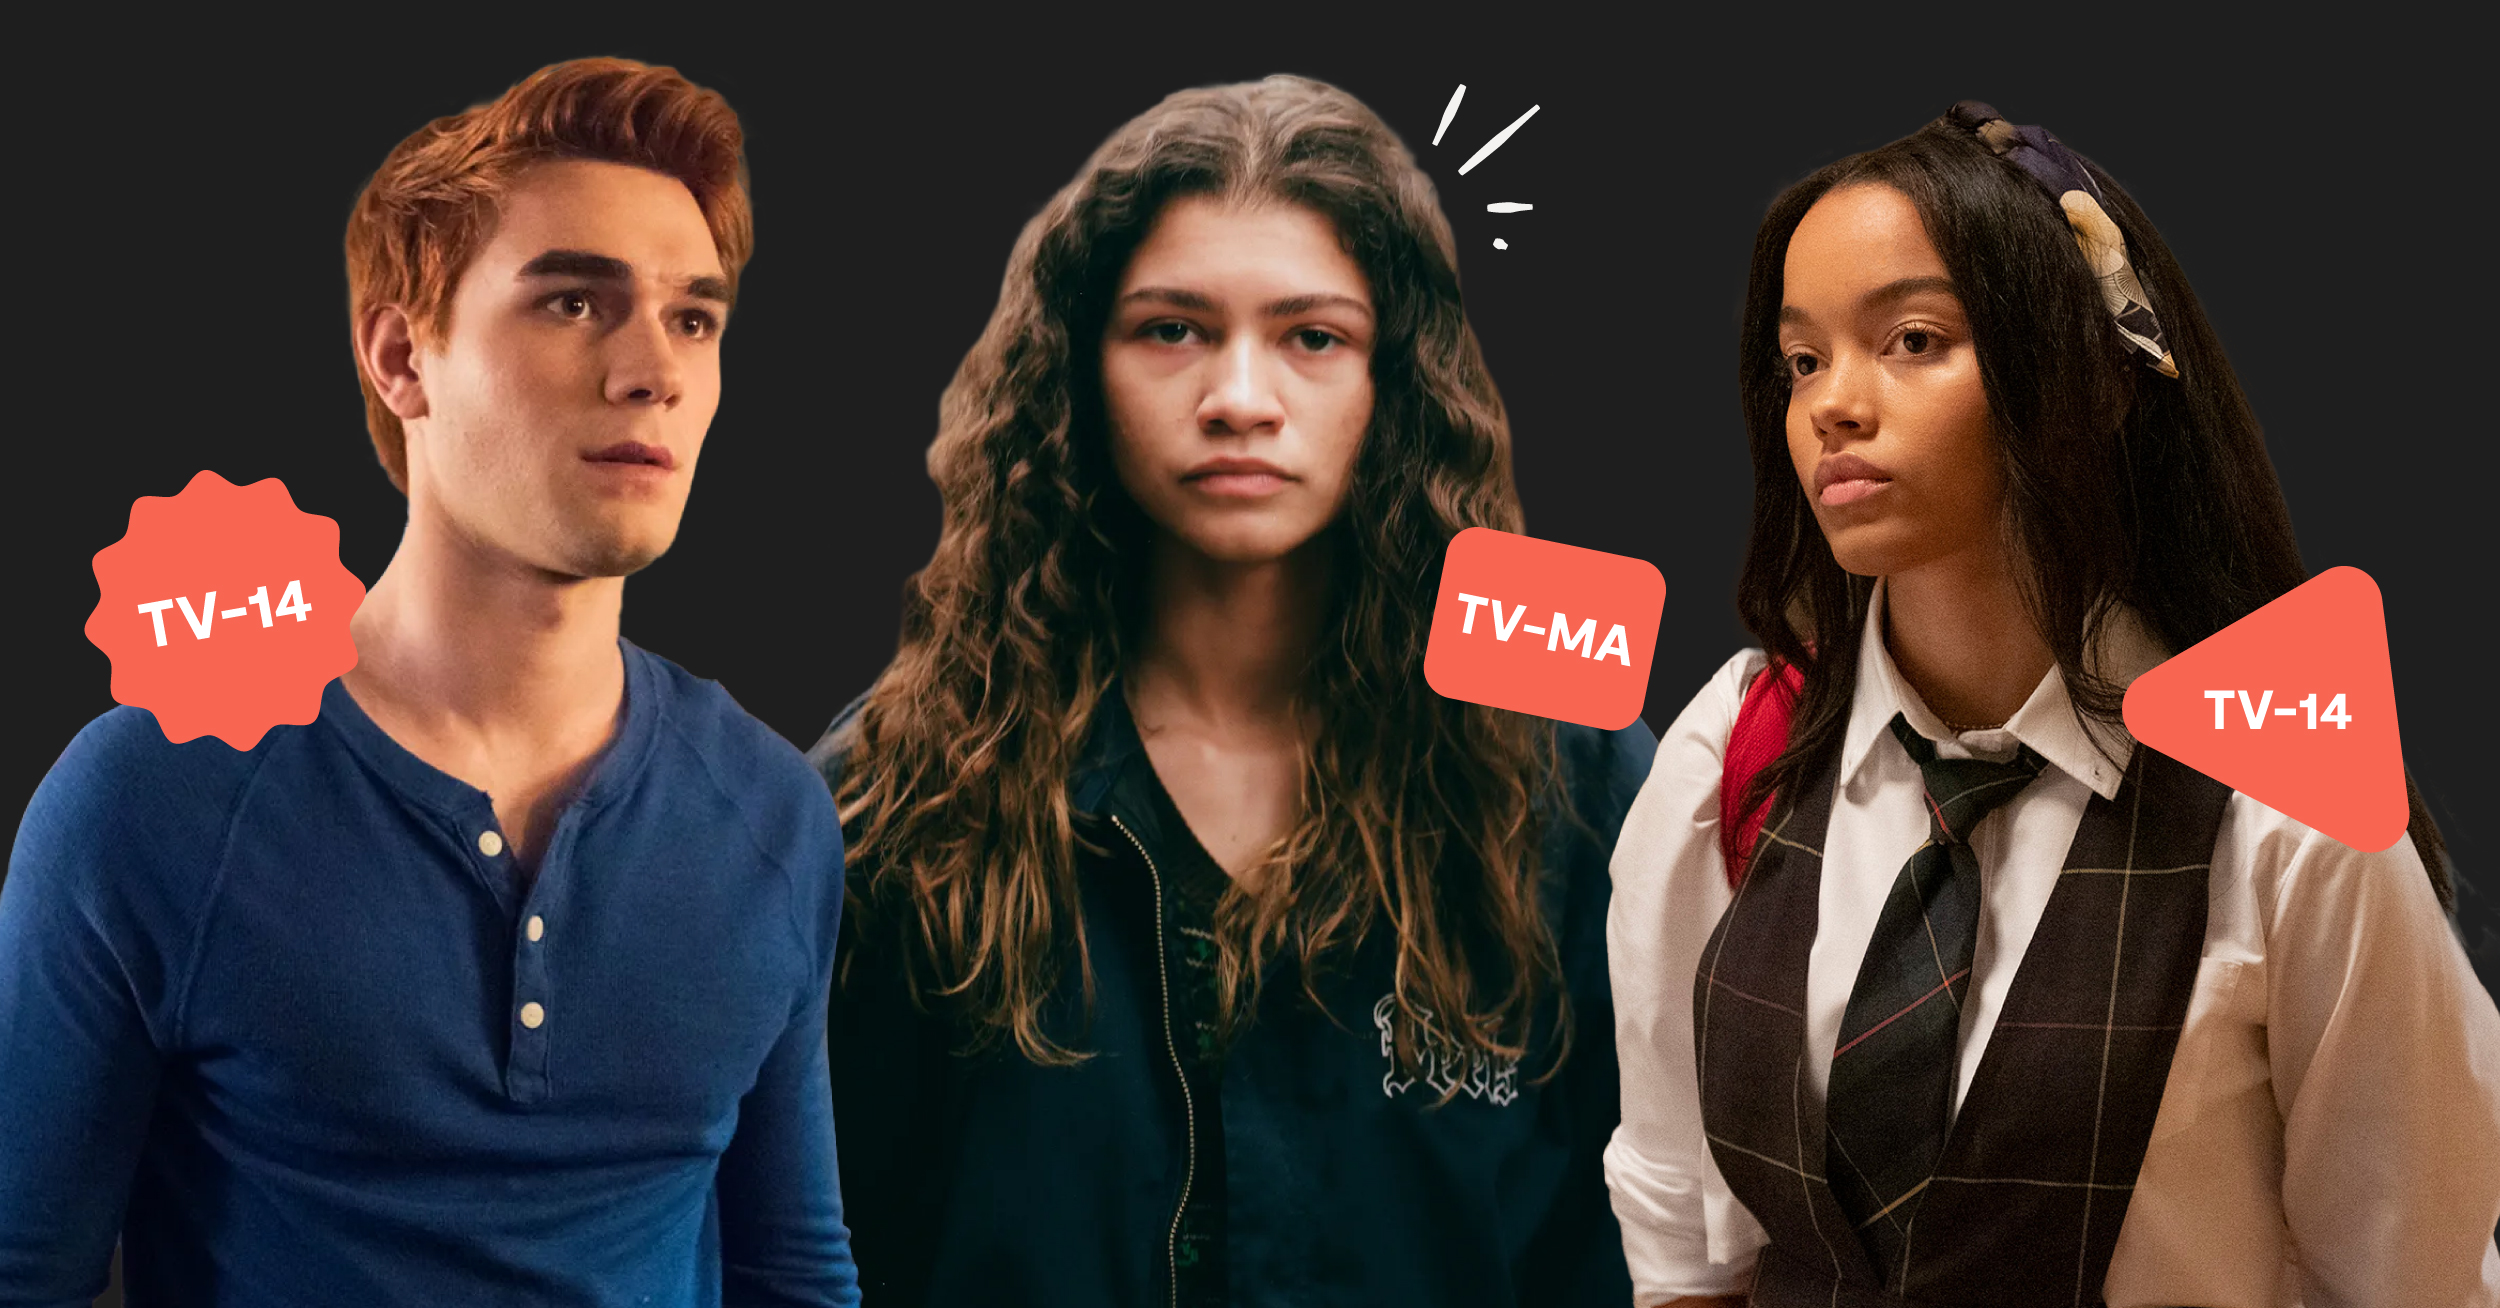 7 Shows About Teens That Aren't For Teens